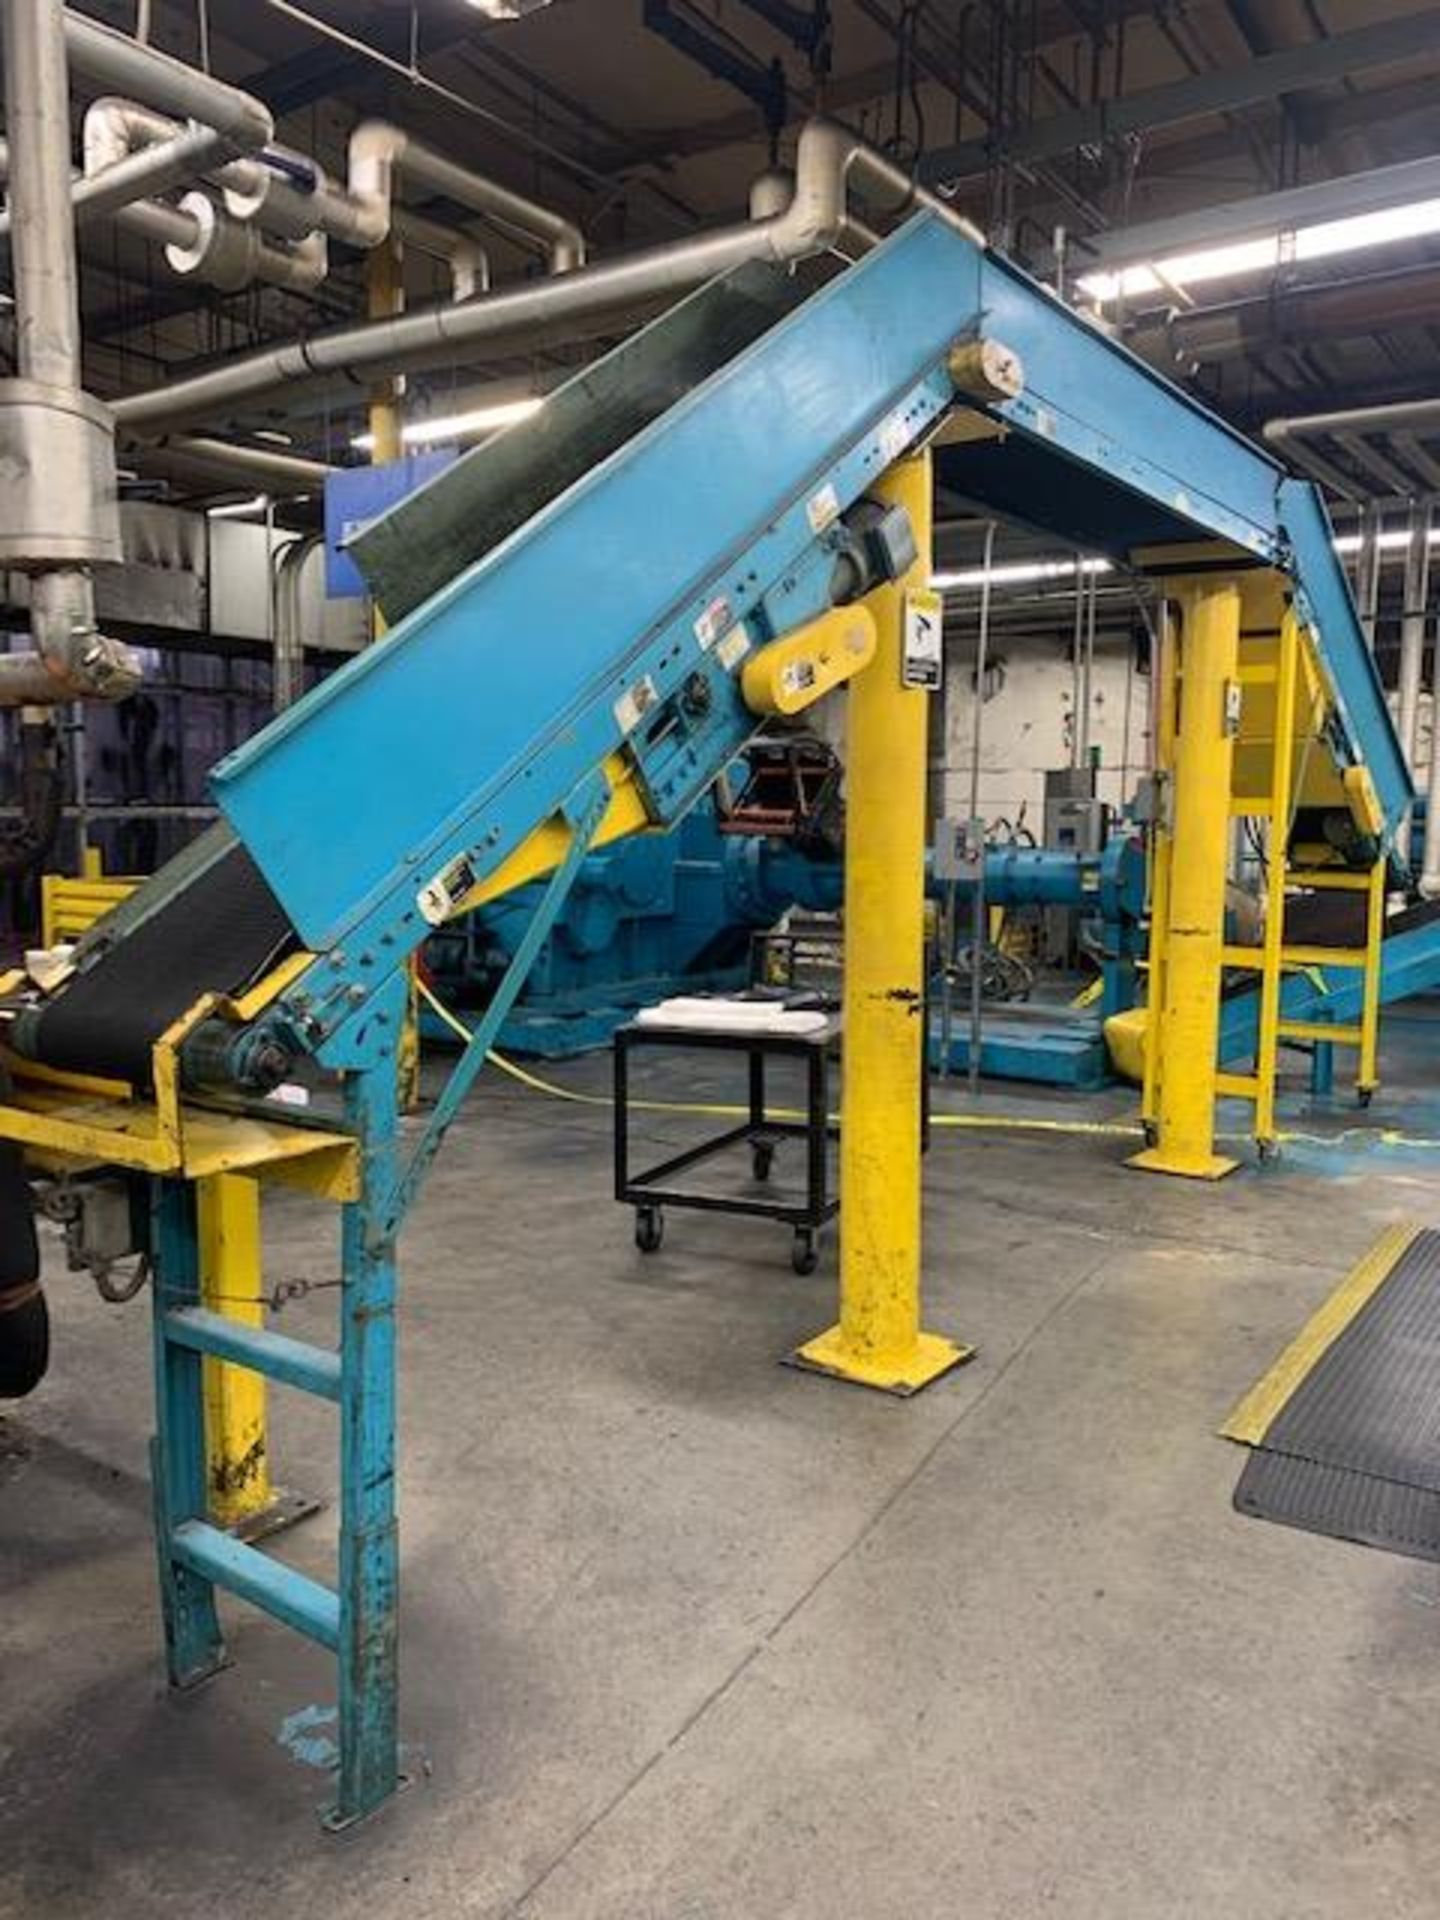 14-1/4" Wide Hytrol Flat Belt Conveyor, 3 Sections, from Cracker Mill to Main Conveyor to Calender